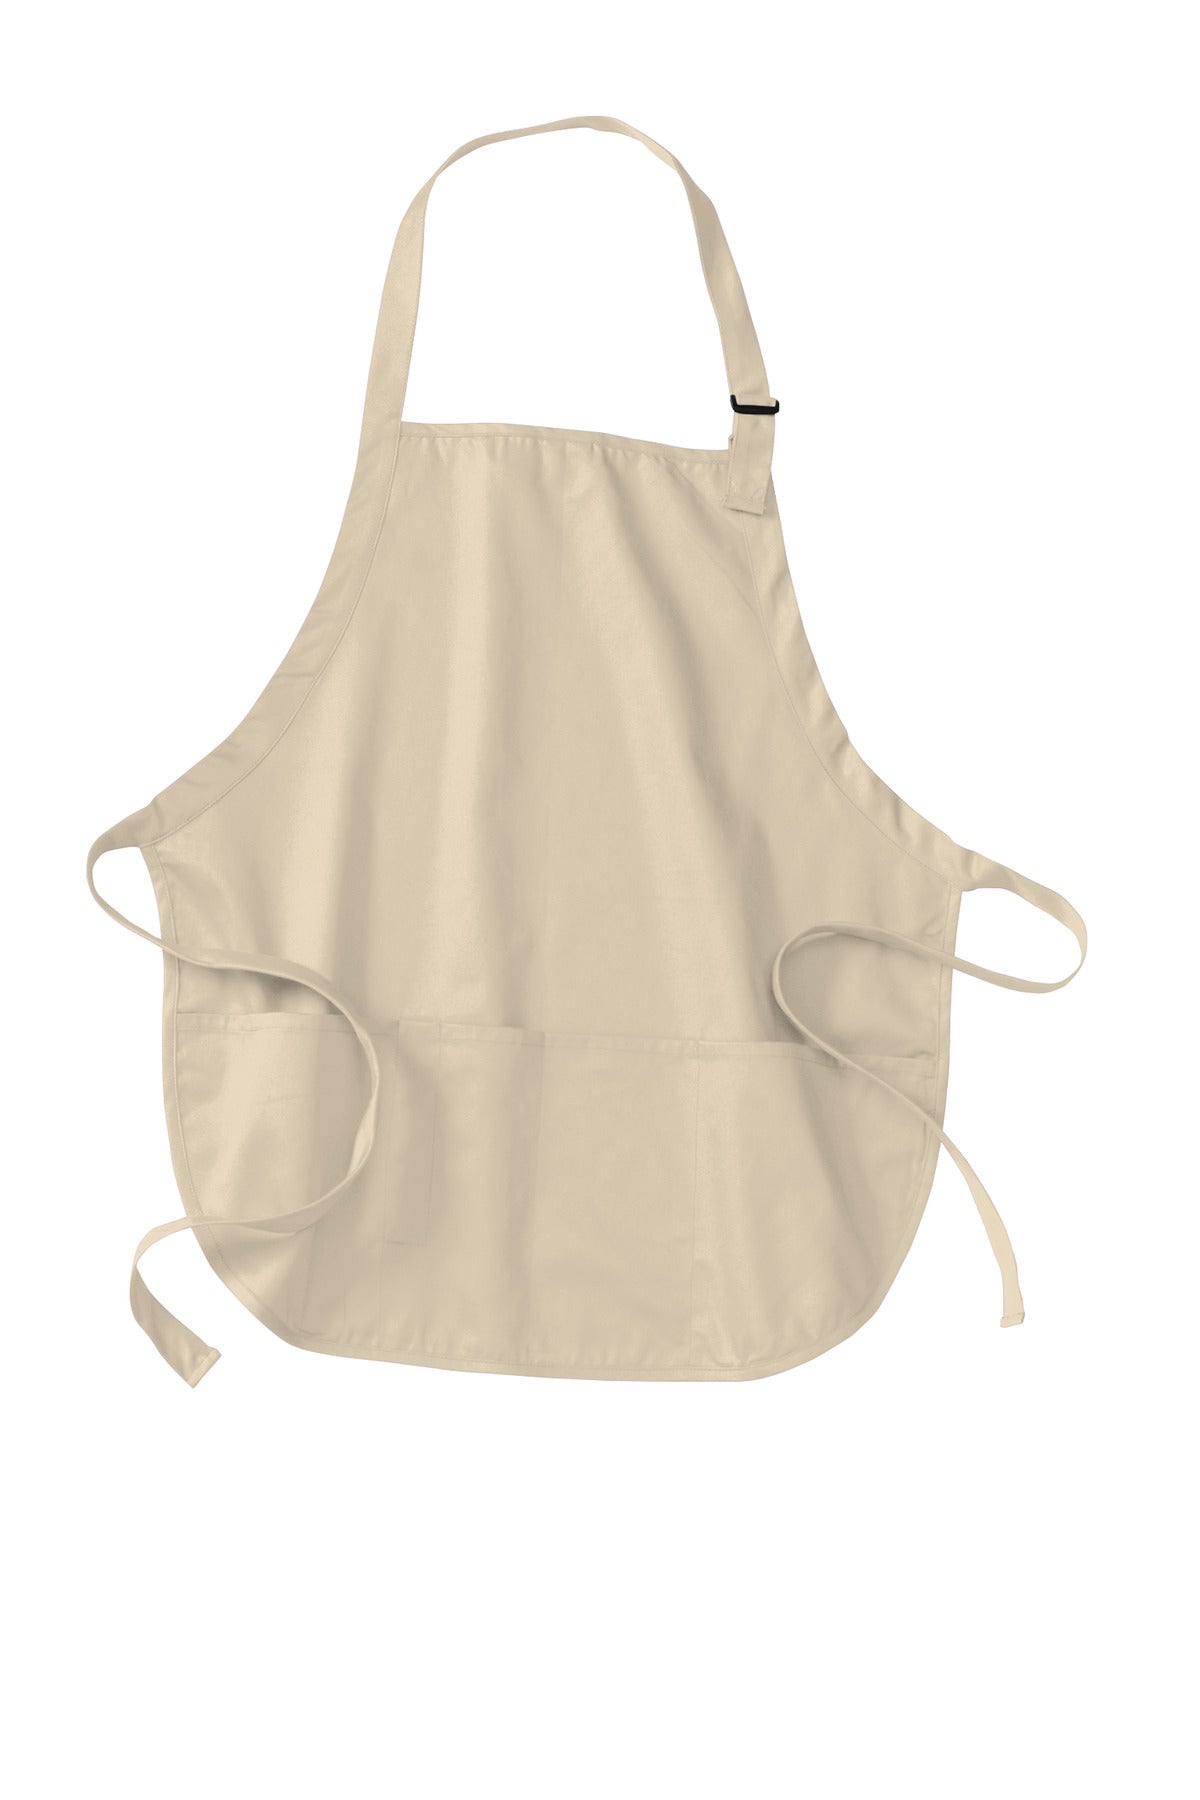 Port Authority Medium-Length Apron with Pouch Pockets. A510